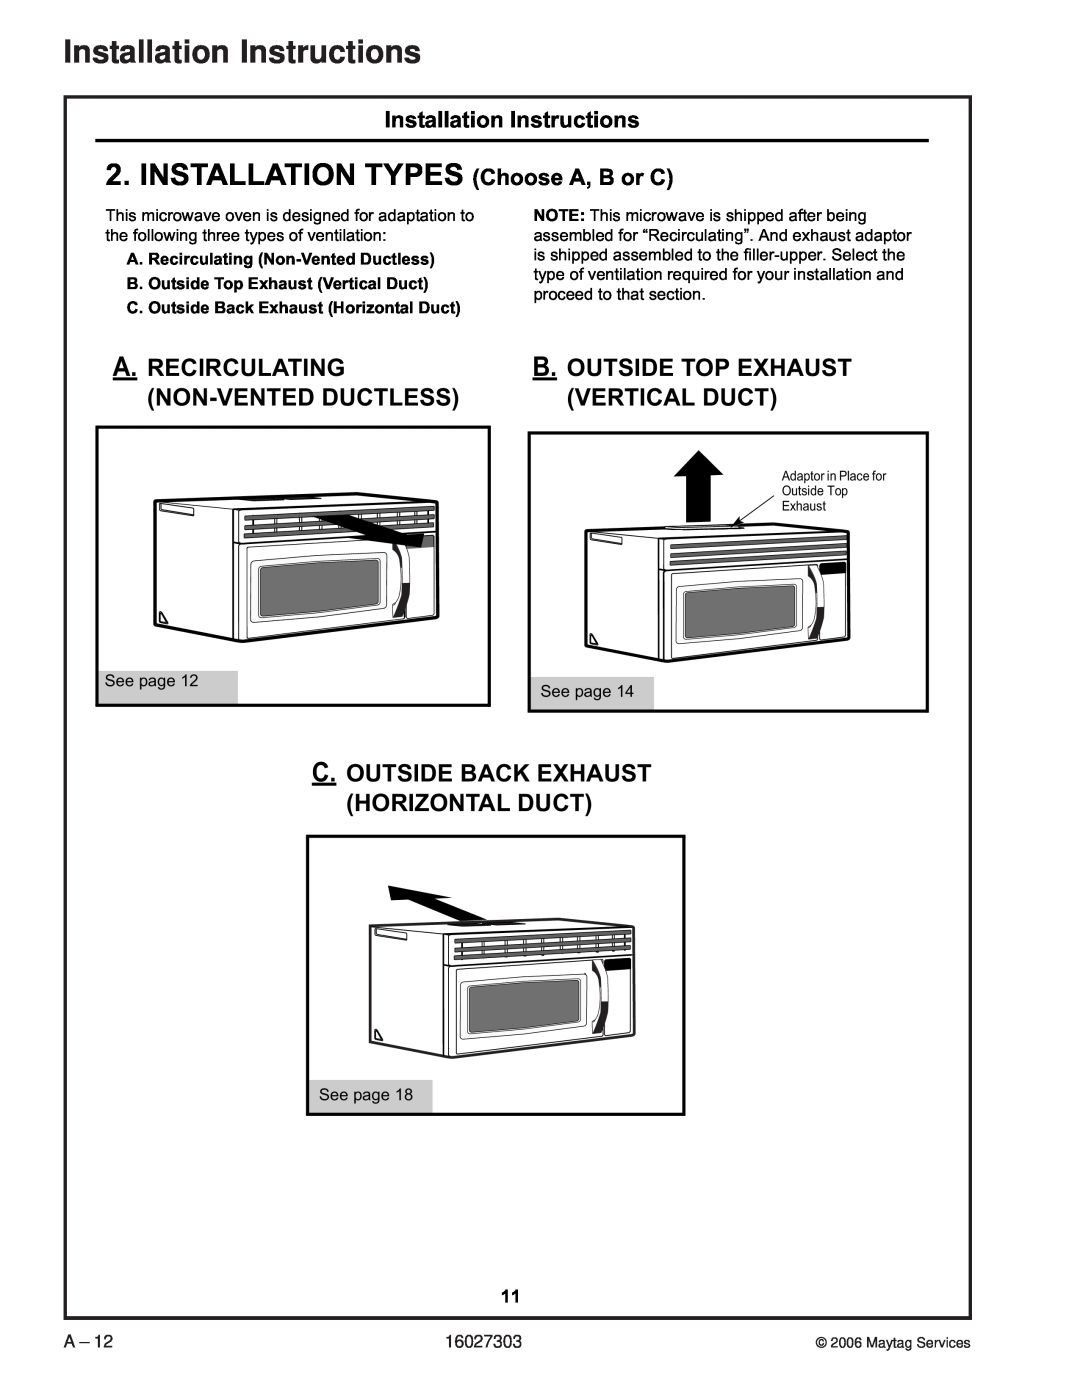 Maytag UMV1152CA manual INSTALLATION TYPES Choose A, B or C, A.Recirculating Non-Ventedductless, Installation Instructions 